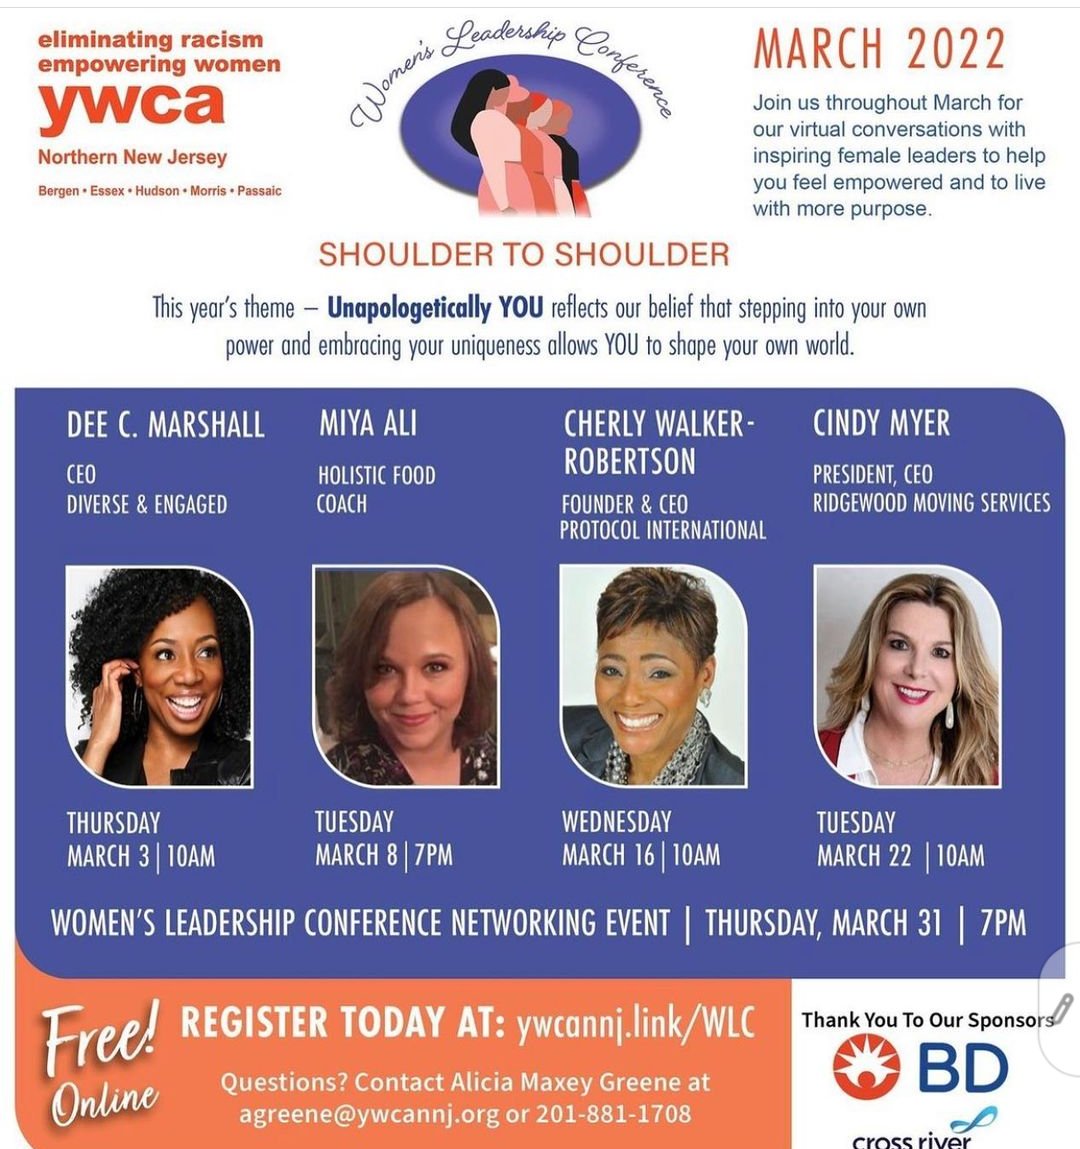 Check out my sister, Miya Ali, speak tonight (7 PM ET) at this great online event. Register at ywcannj.link/WLC